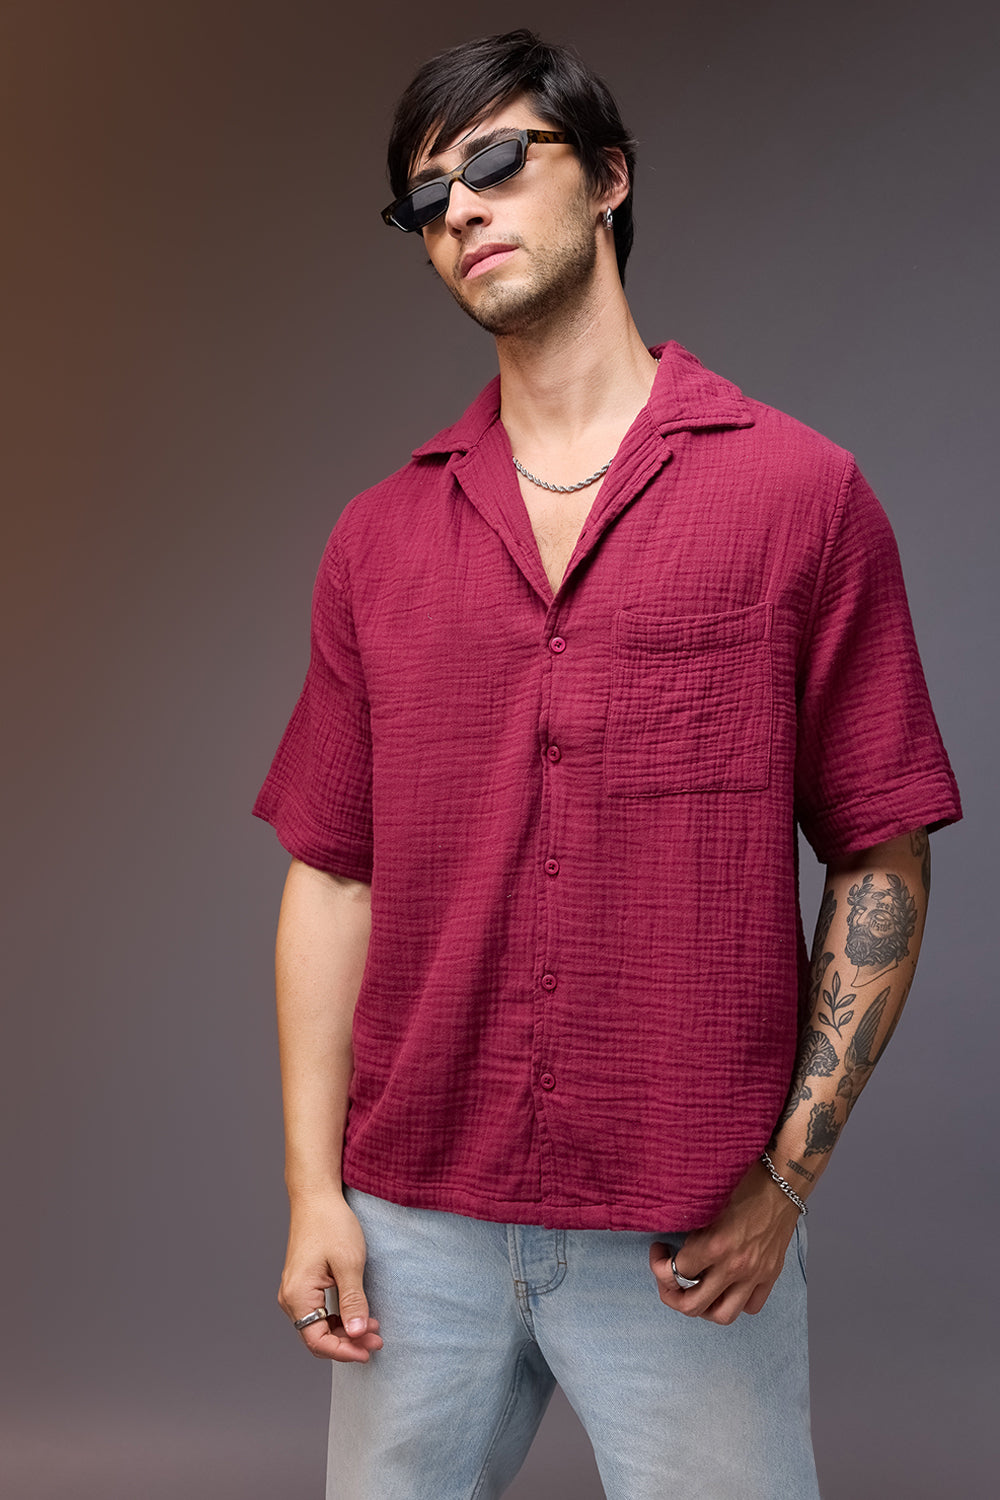 BREEZY RELAXED MAROON SHIRT